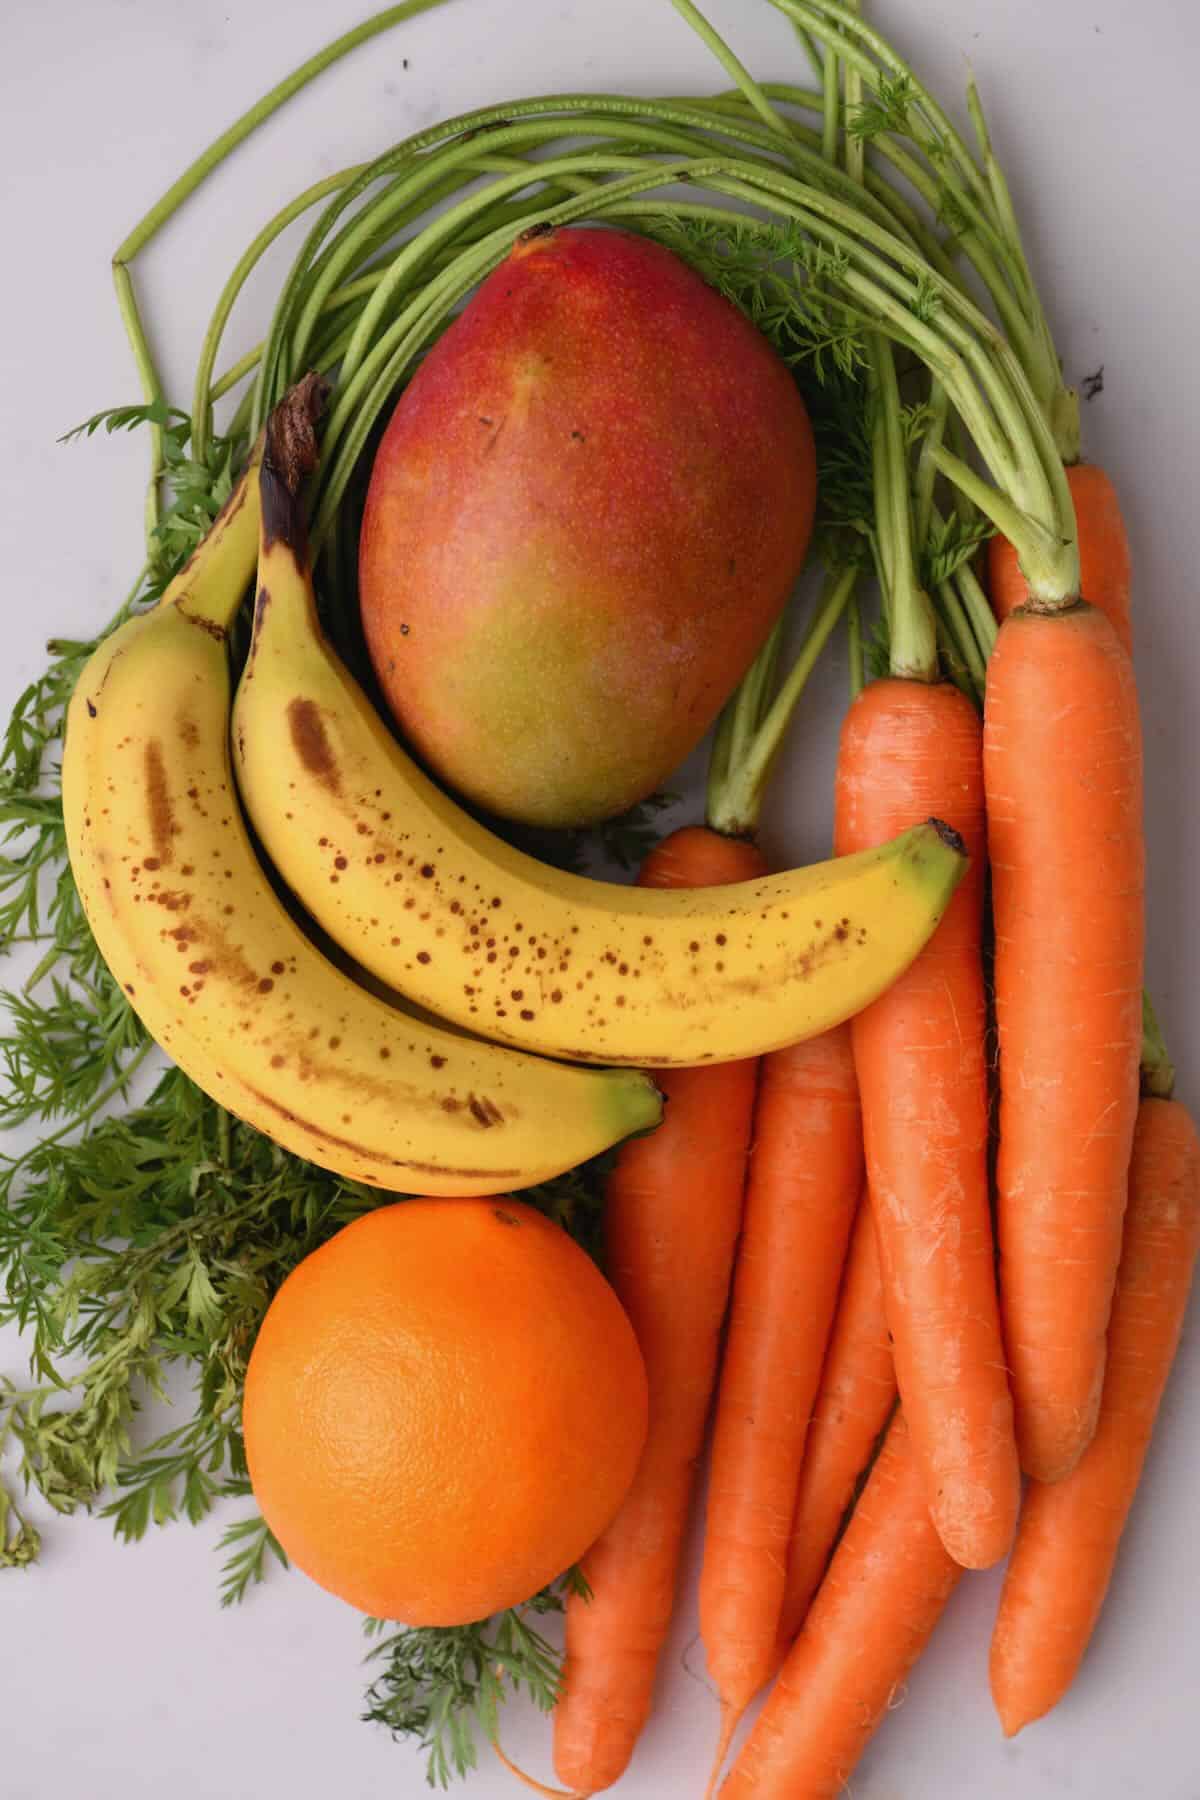 Fruit and veggies with high sugar content